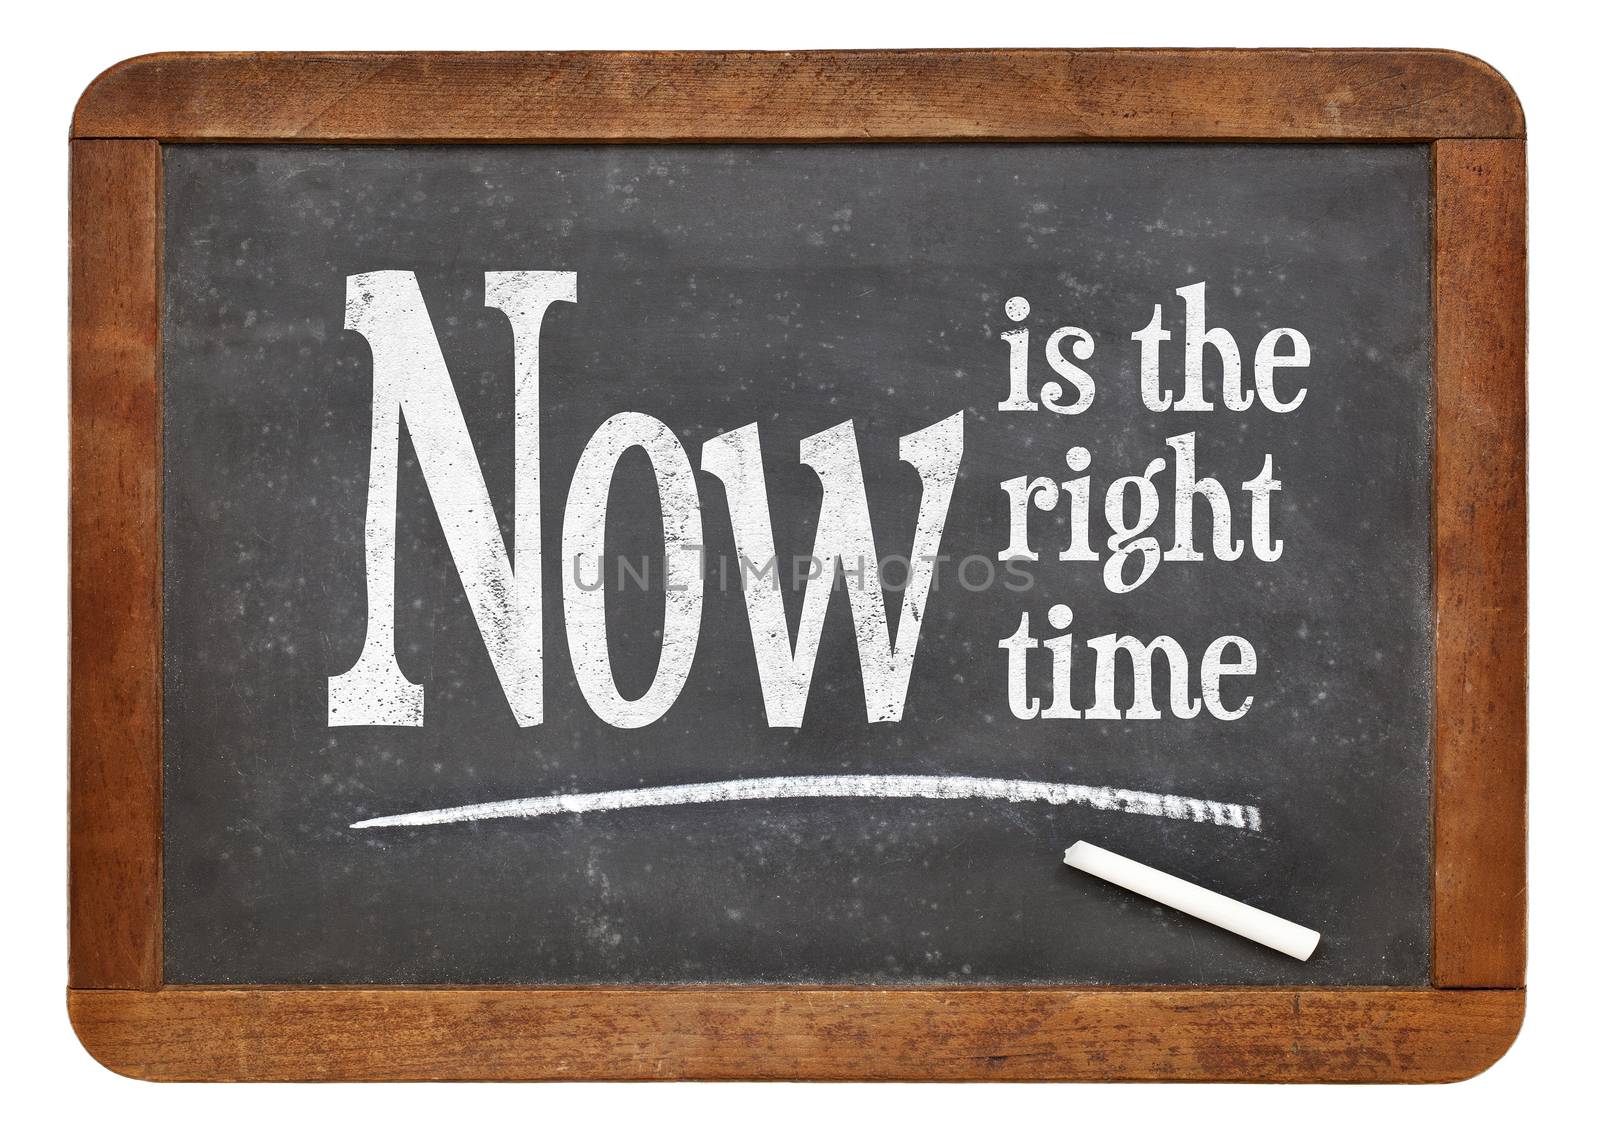 Now is the right time- motivational phrase on a vintage slate blackboard